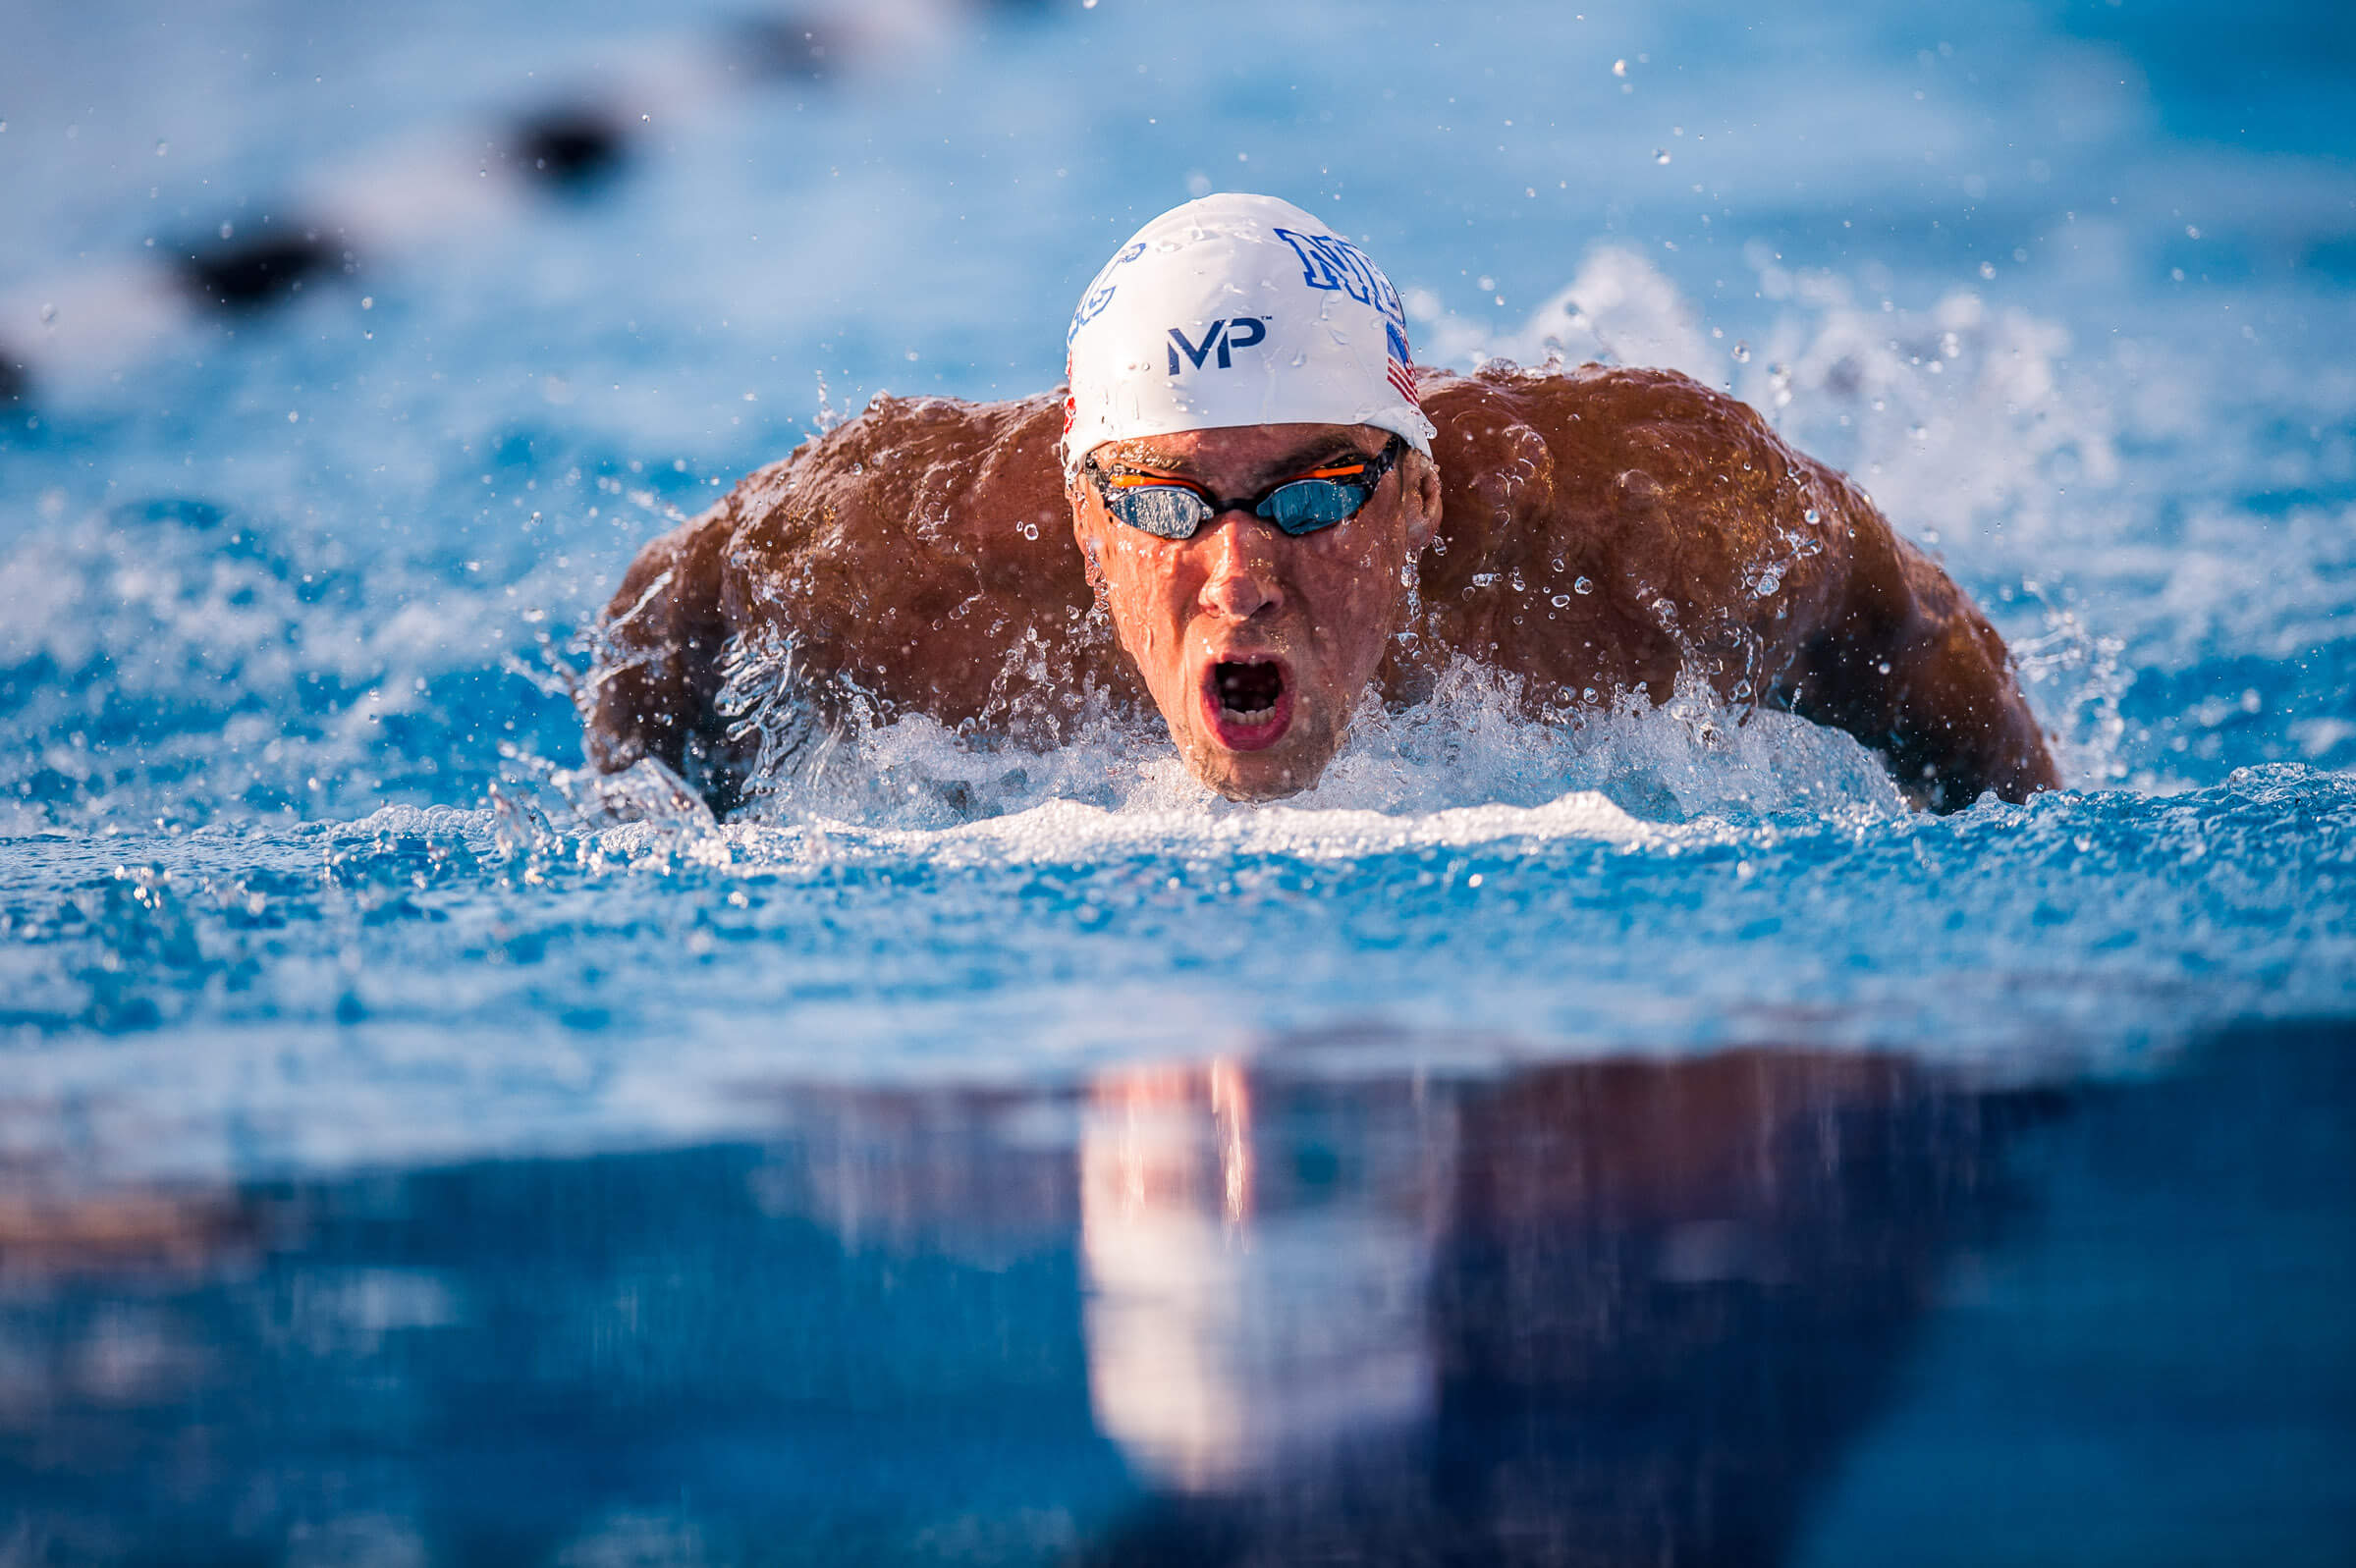 Watch Michael Phelps Race Video of Top-Ranked 100 Fly